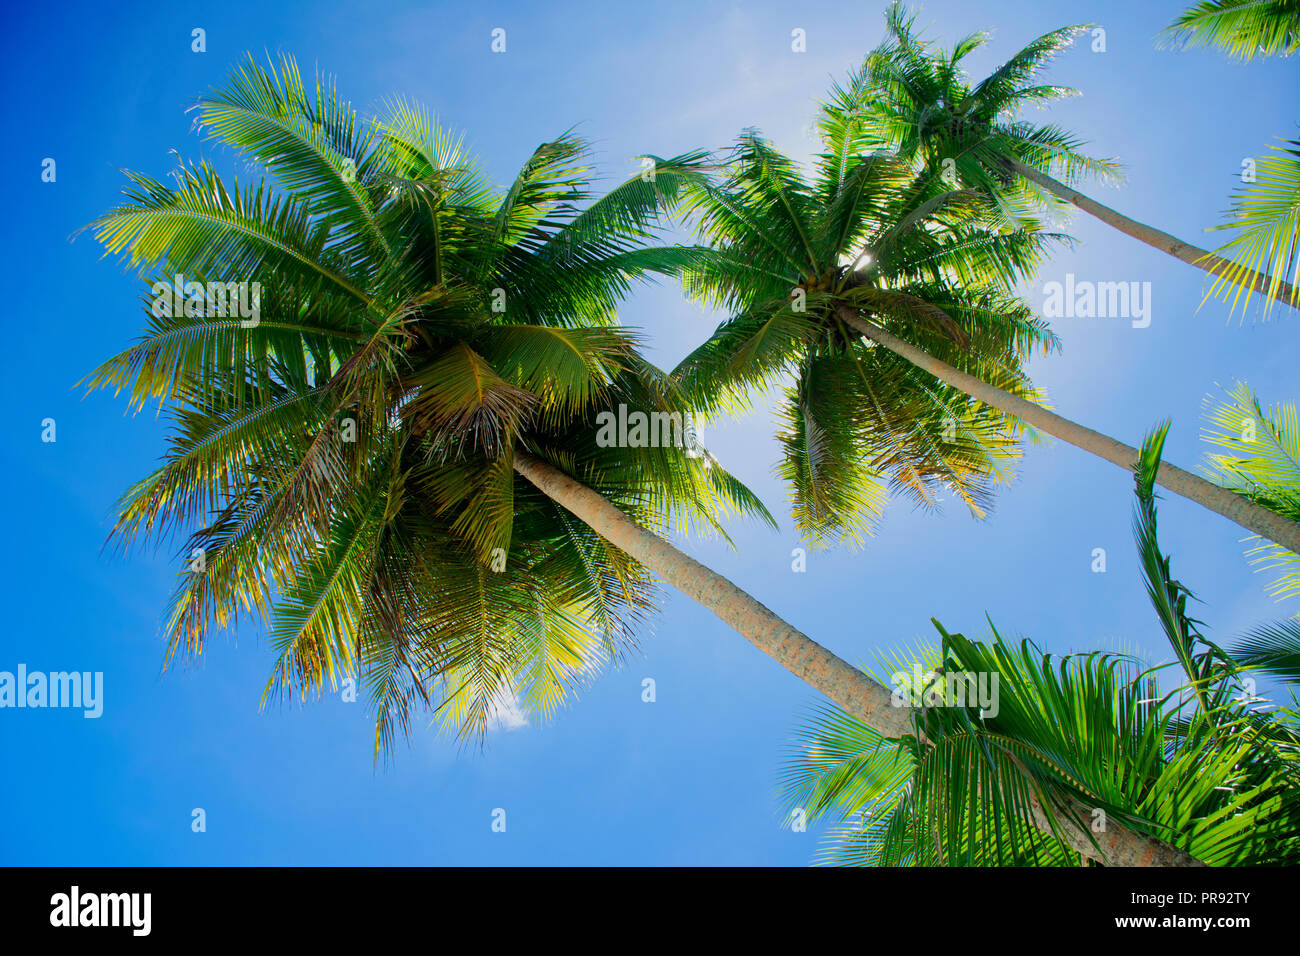 Coconut trees and blue sky, Ant Atoll, Pohnpei, Federated States of Micronesia Stock Photo